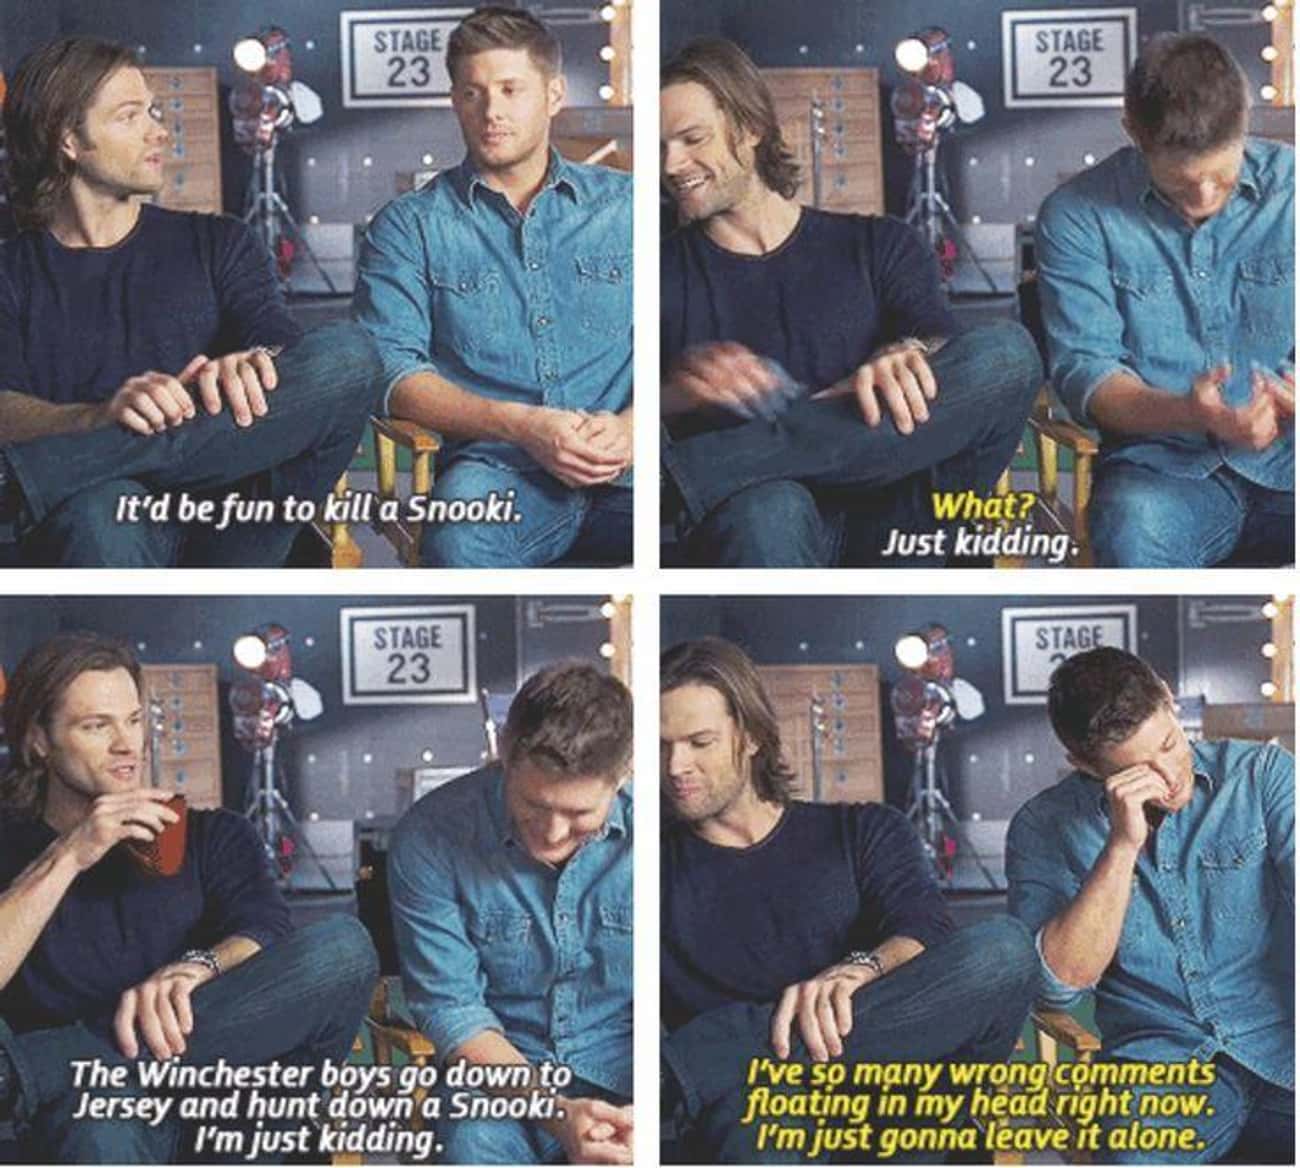 Jensen Has Too Many Dirty Thoughts